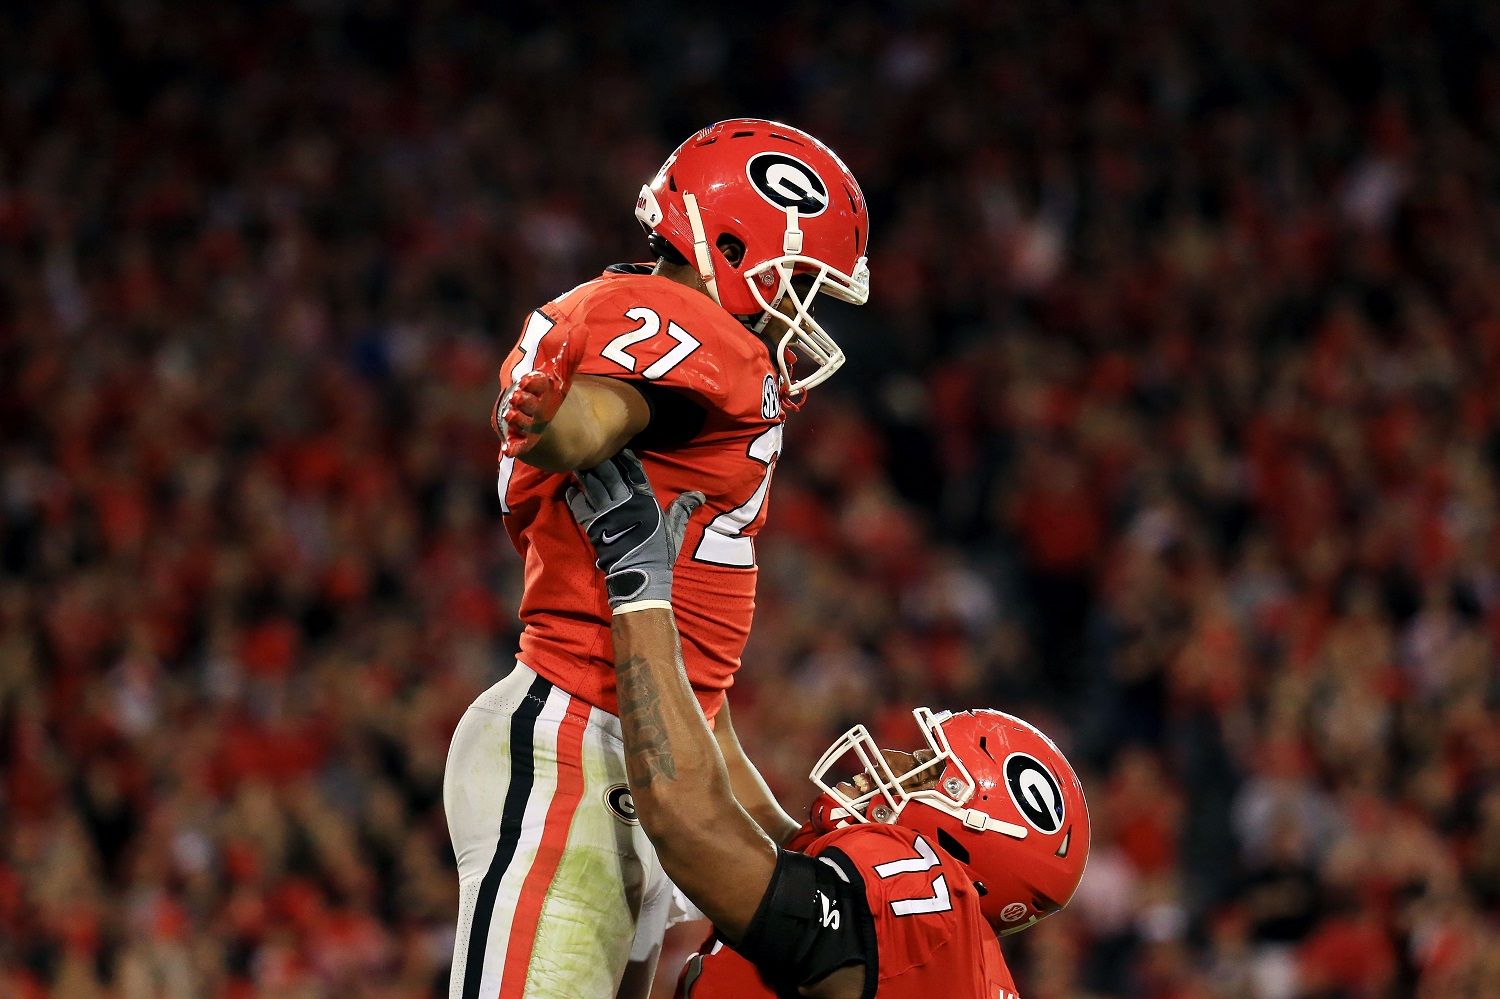 ATHENS, GA - NOVEMBER 18: Nick Chubb #27 of the Georgia Bulldogs celebrates a touchdown with Isaiah Wynn #77 during the second half against the Kentucky Wildcats at Sanford Stadium on November 18, 2017 in Athens, Georgia. (Photo by Daniel Shirey/Getty Images)